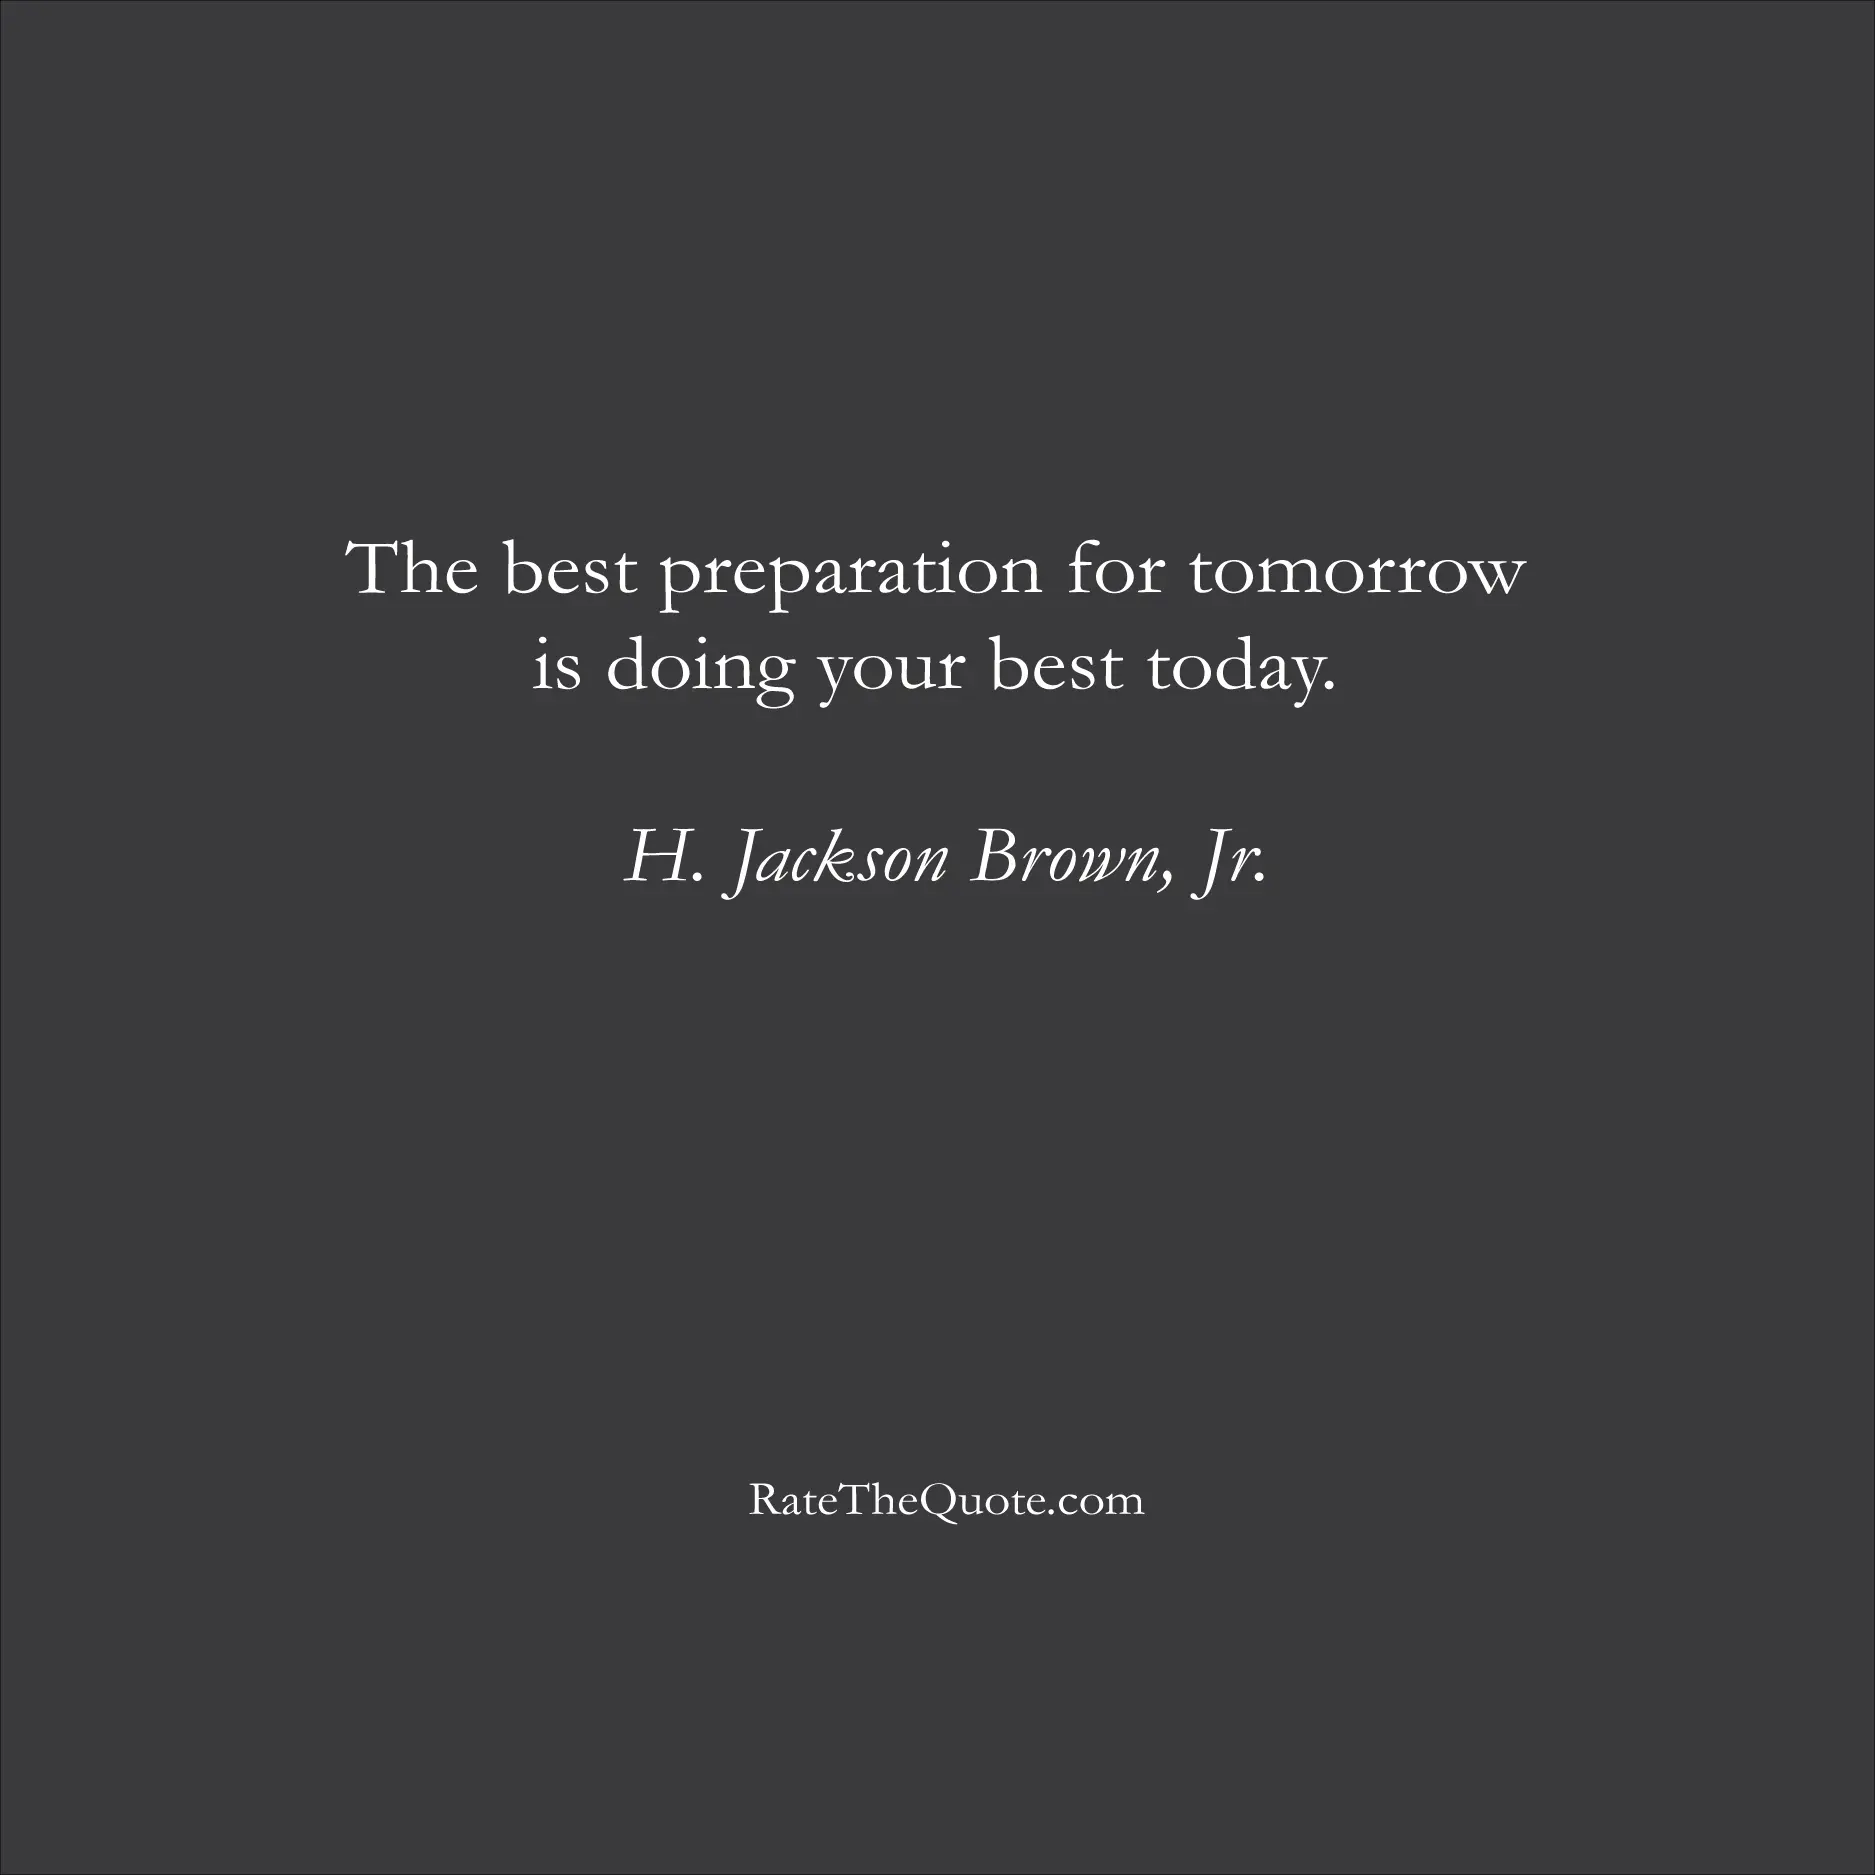 Inspirational Quotes The best preparation for tomorrow is doing your best today. H. Jackson Brown, Jr.